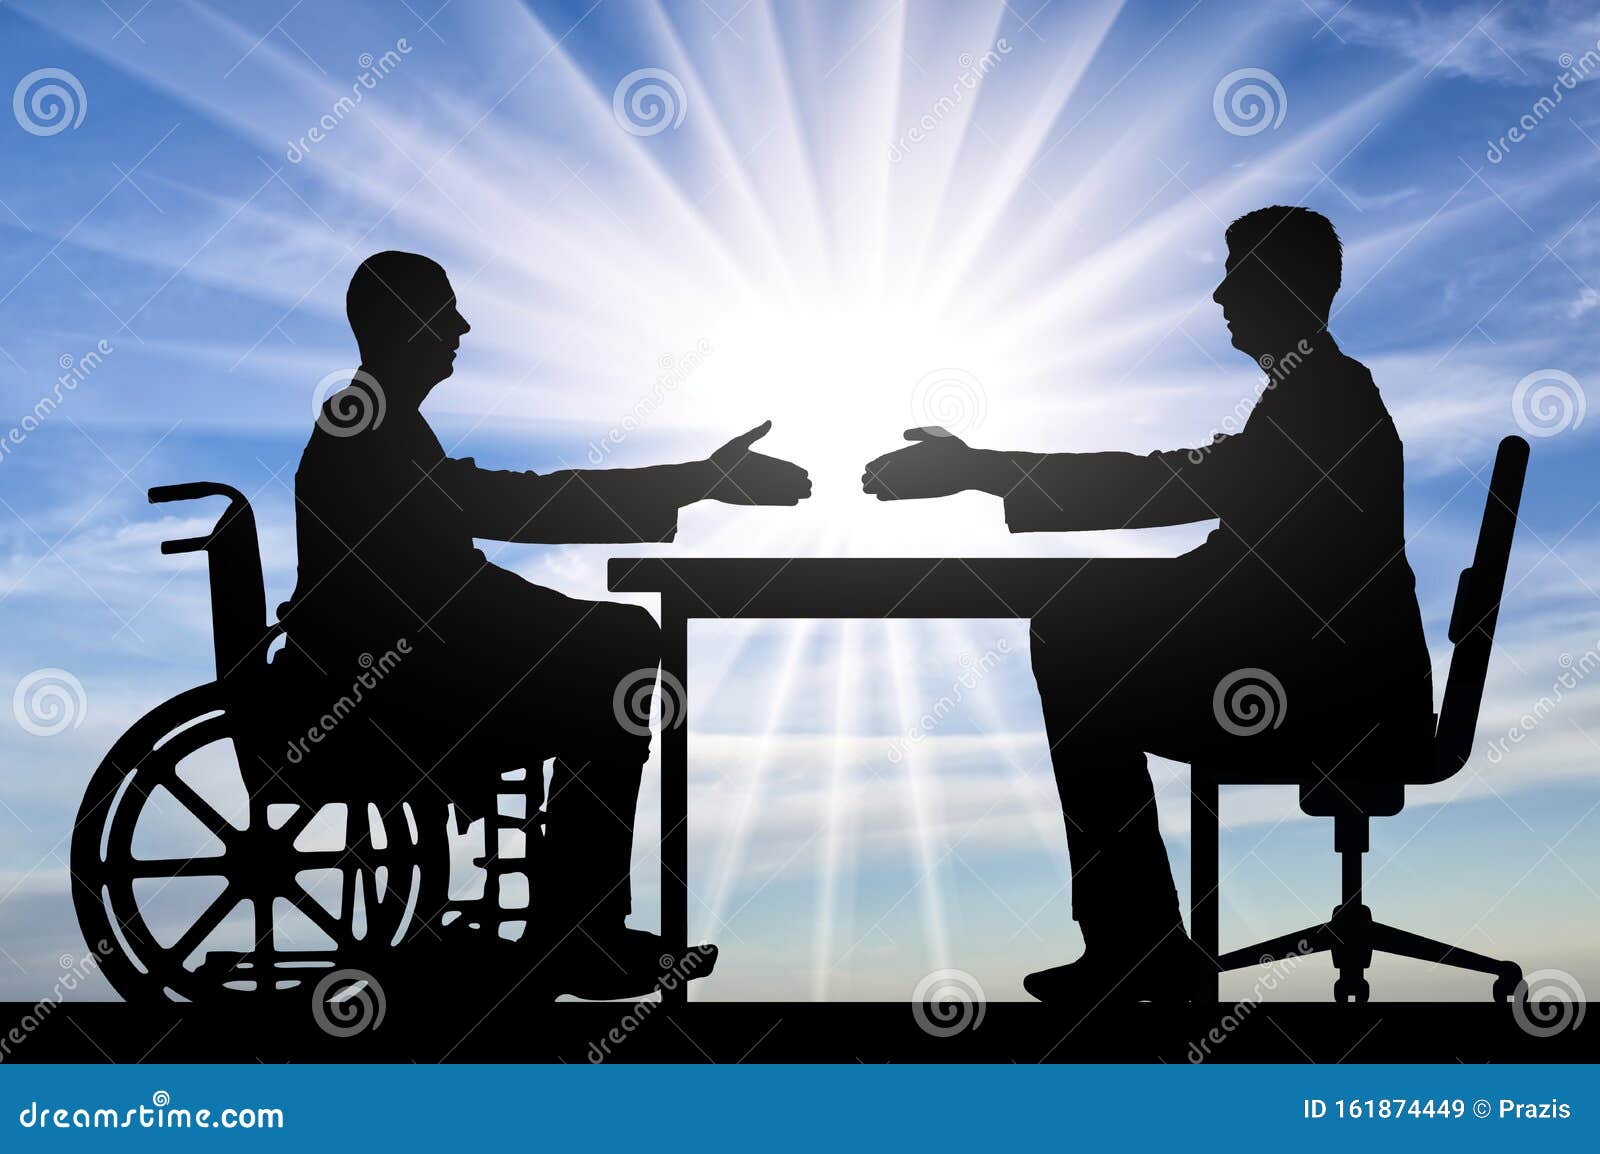 concept of employment of persons with disabilities